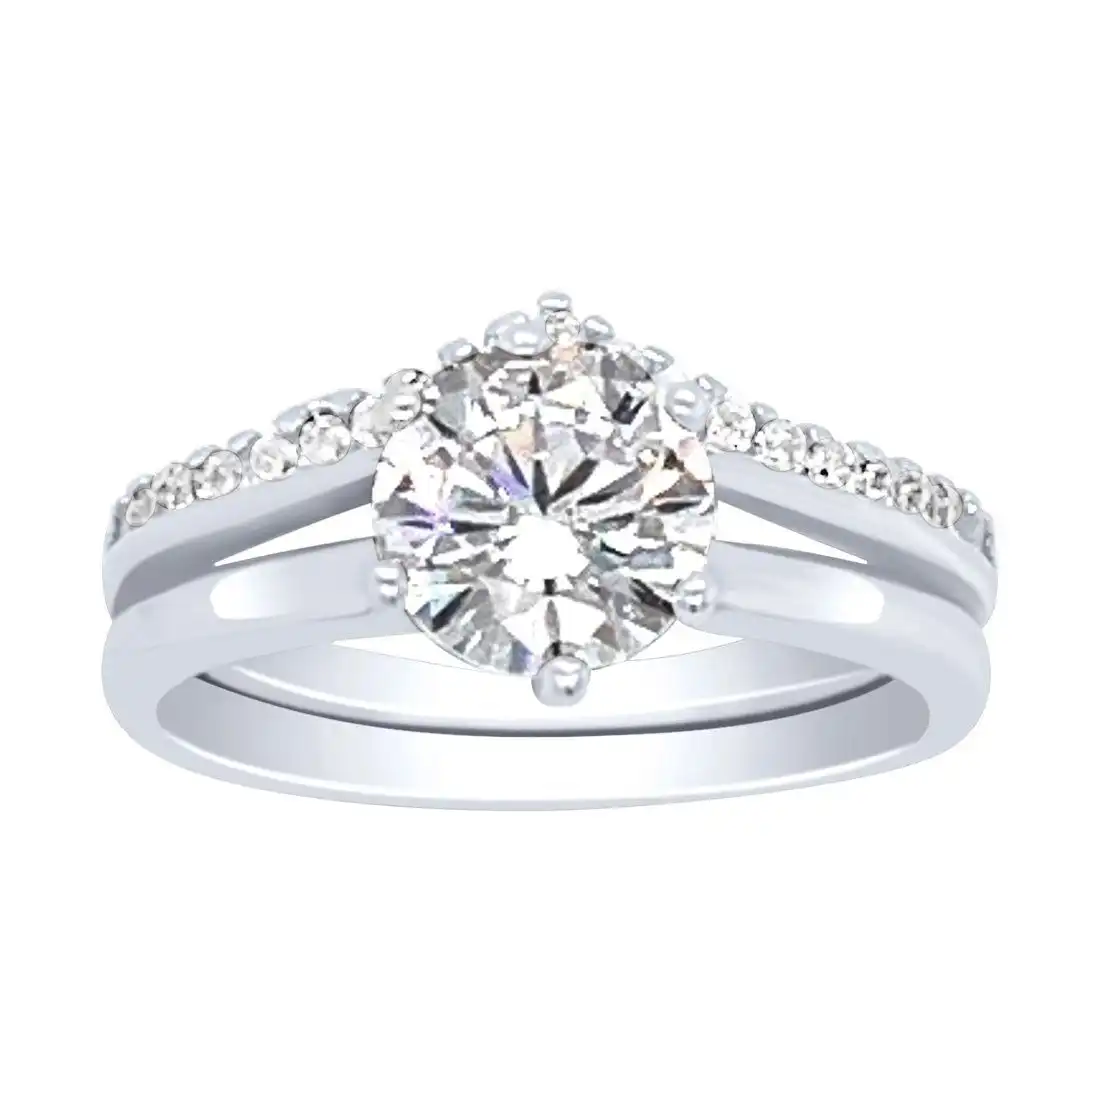 Sterling Silver and Cubic Zirconia Solitaire with Studded V Shaped Band Ring Set